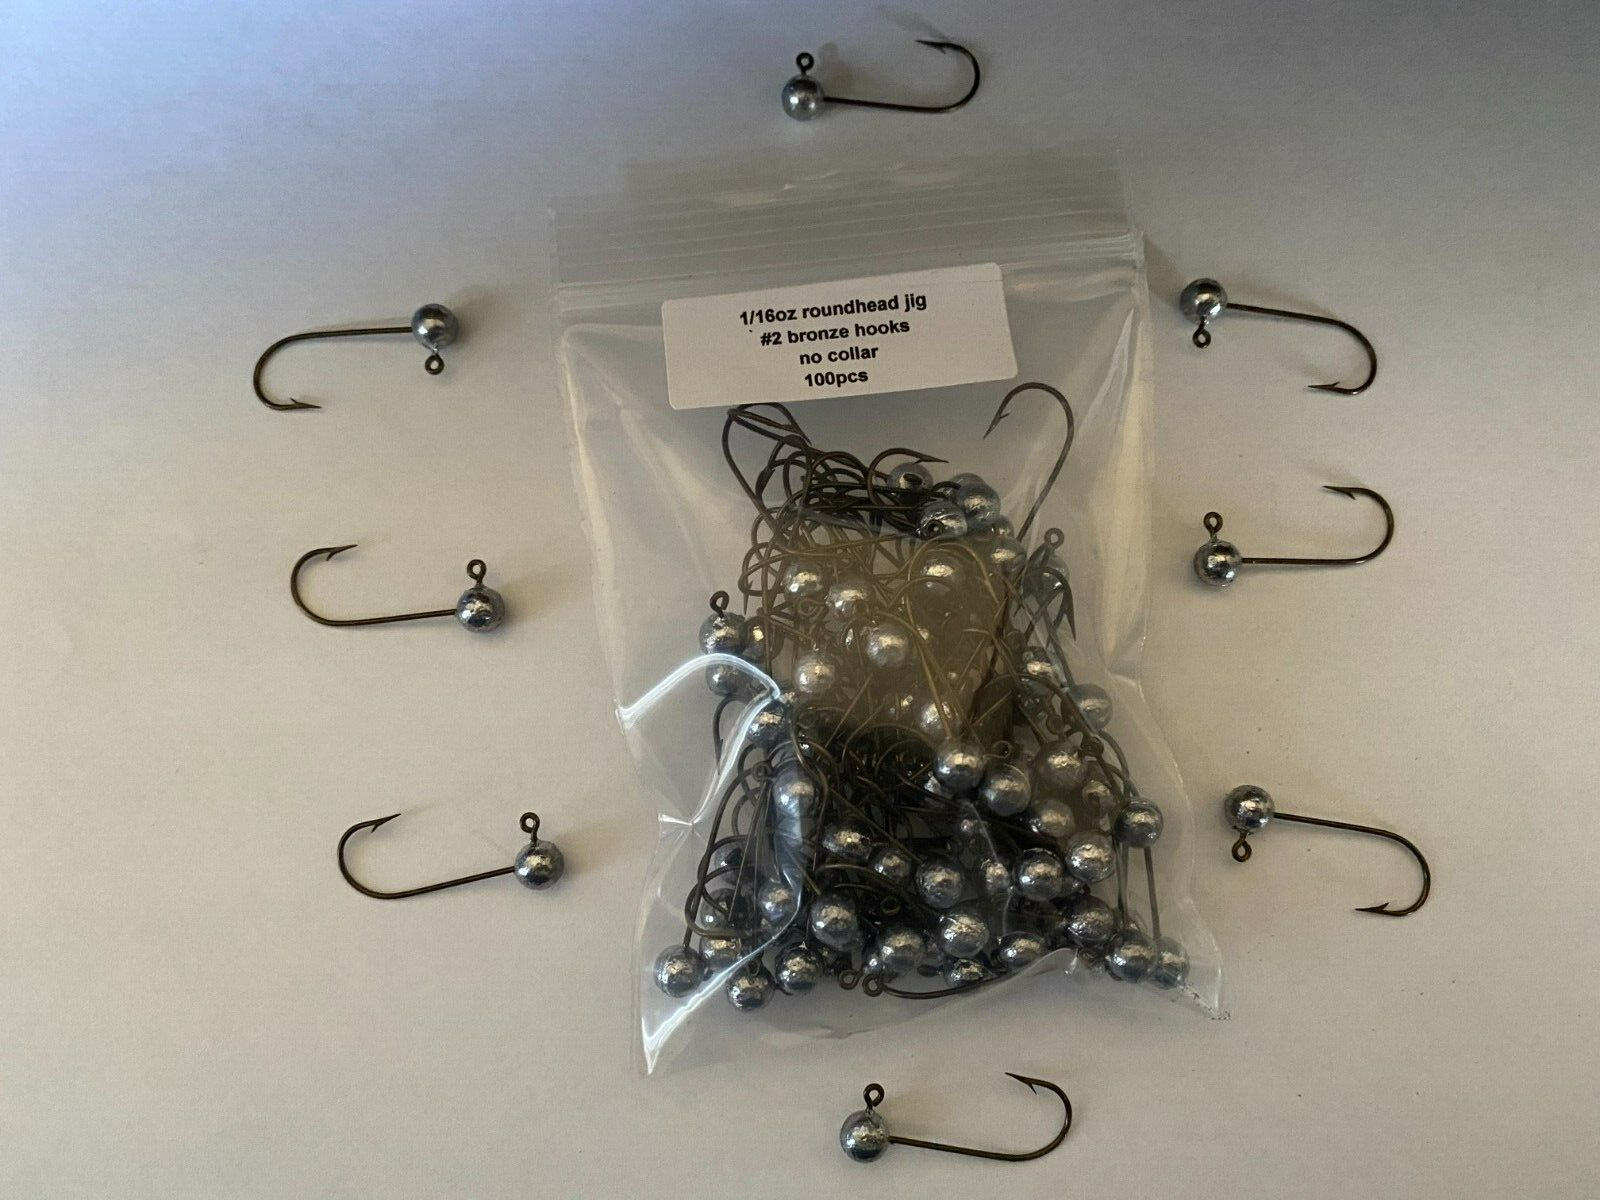 1/16oz Roundhead jig no collar and #2 J bronze hook 100 pcs – M & C's  Handcrafted Jigs & Lures